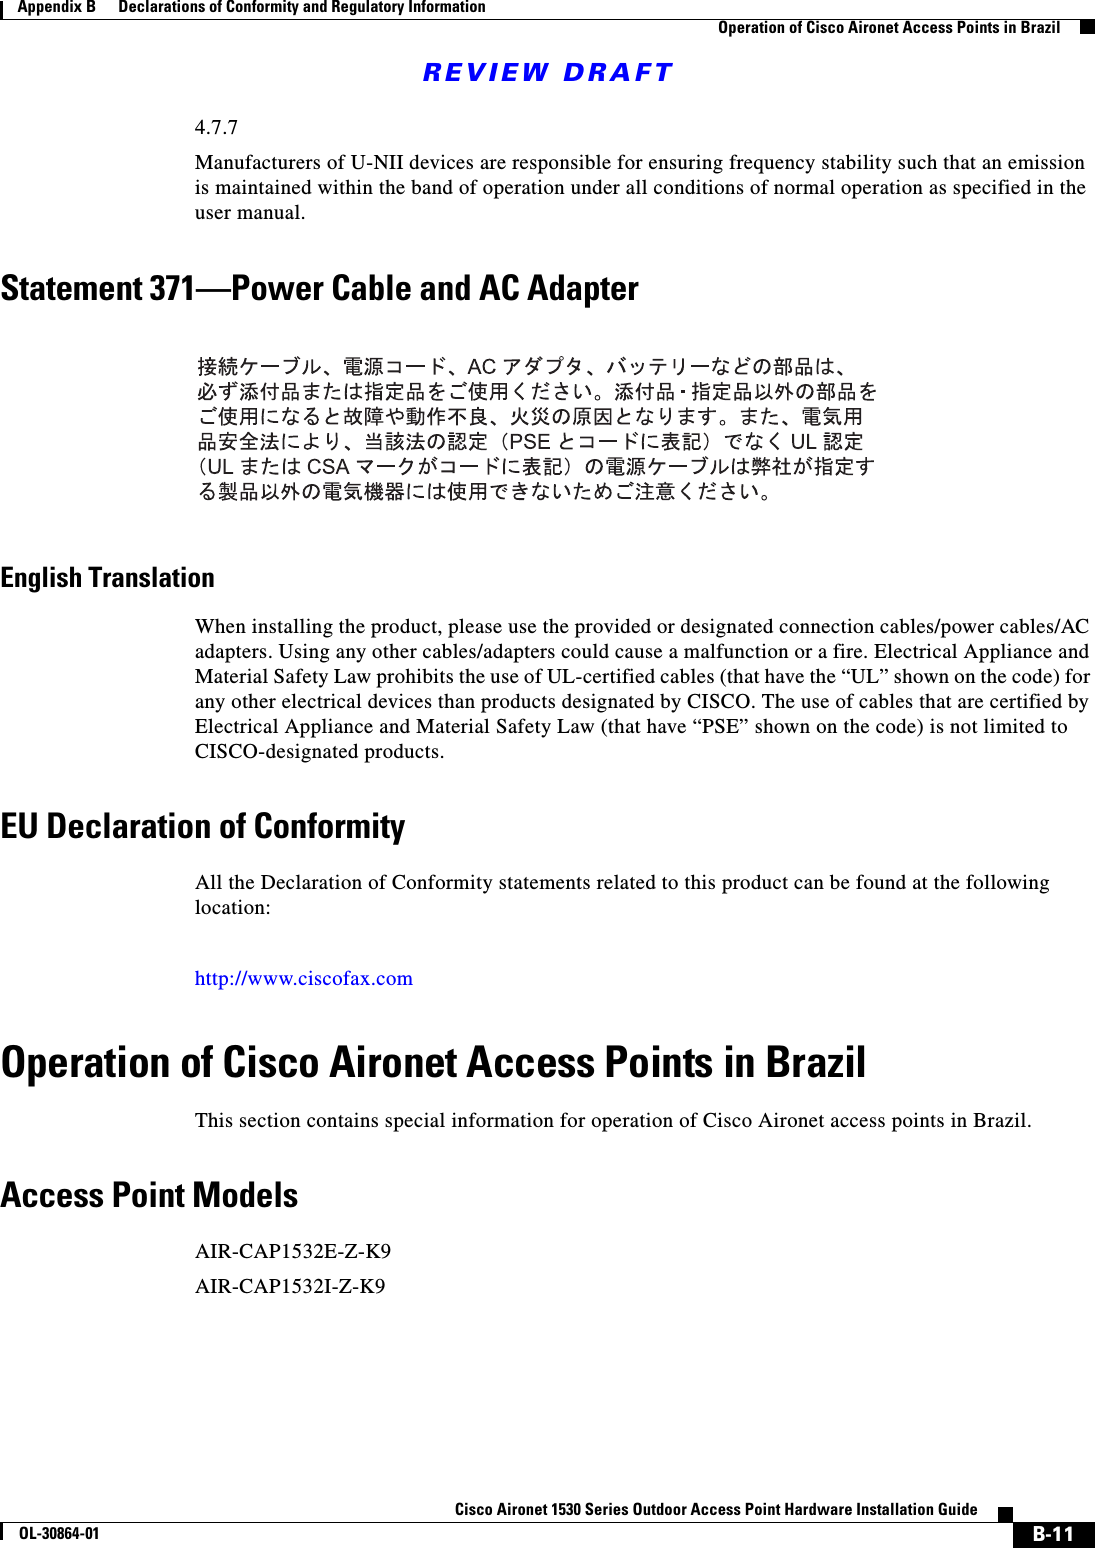 REVIEW DRAFTB-11Cisco Aironet 1530 Series Outdoor Access Point Hardware Installation GuideOL-30864-01Appendix B      Declarations of Conformity and Regulatory InformationOperation of Cisco Aironet Access Points in Brazil4.7.7Manufacturers of U-NII devices are responsible for ensuring frequency stability such that an emission is maintained within the band of operation under all conditions of normal operation as specified in the user manual.Statement 371—Power Cable and AC AdapterEnglish TranslationWhen installing the product, please use the provided or designated connection cables/power cables/AC adapters. Using any other cables/adapters could cause a malfunction or a fire. Electrical Appliance and Material Safety Law prohibits the use of UL-certified cables (that have the “UL” shown on the code) for any other electrical devices than products designated by CISCO. The use of cables that are certified by Electrical Appliance and Material Safety Law (that have “PSE” shown on the code) is not limited to CISCO-designated products.EU Declaration of ConformityAll the Declaration of Conformity statements related to this product can be found at the following location:http://www.ciscofax.comOperation of Cisco Aironet Access Points in BrazilThis section contains special information for operation of Cisco Aironet access points in Brazil.Access Point ModelsAIR-CAP1532E-Z-K9AIR-CAP1532I-Z-K9